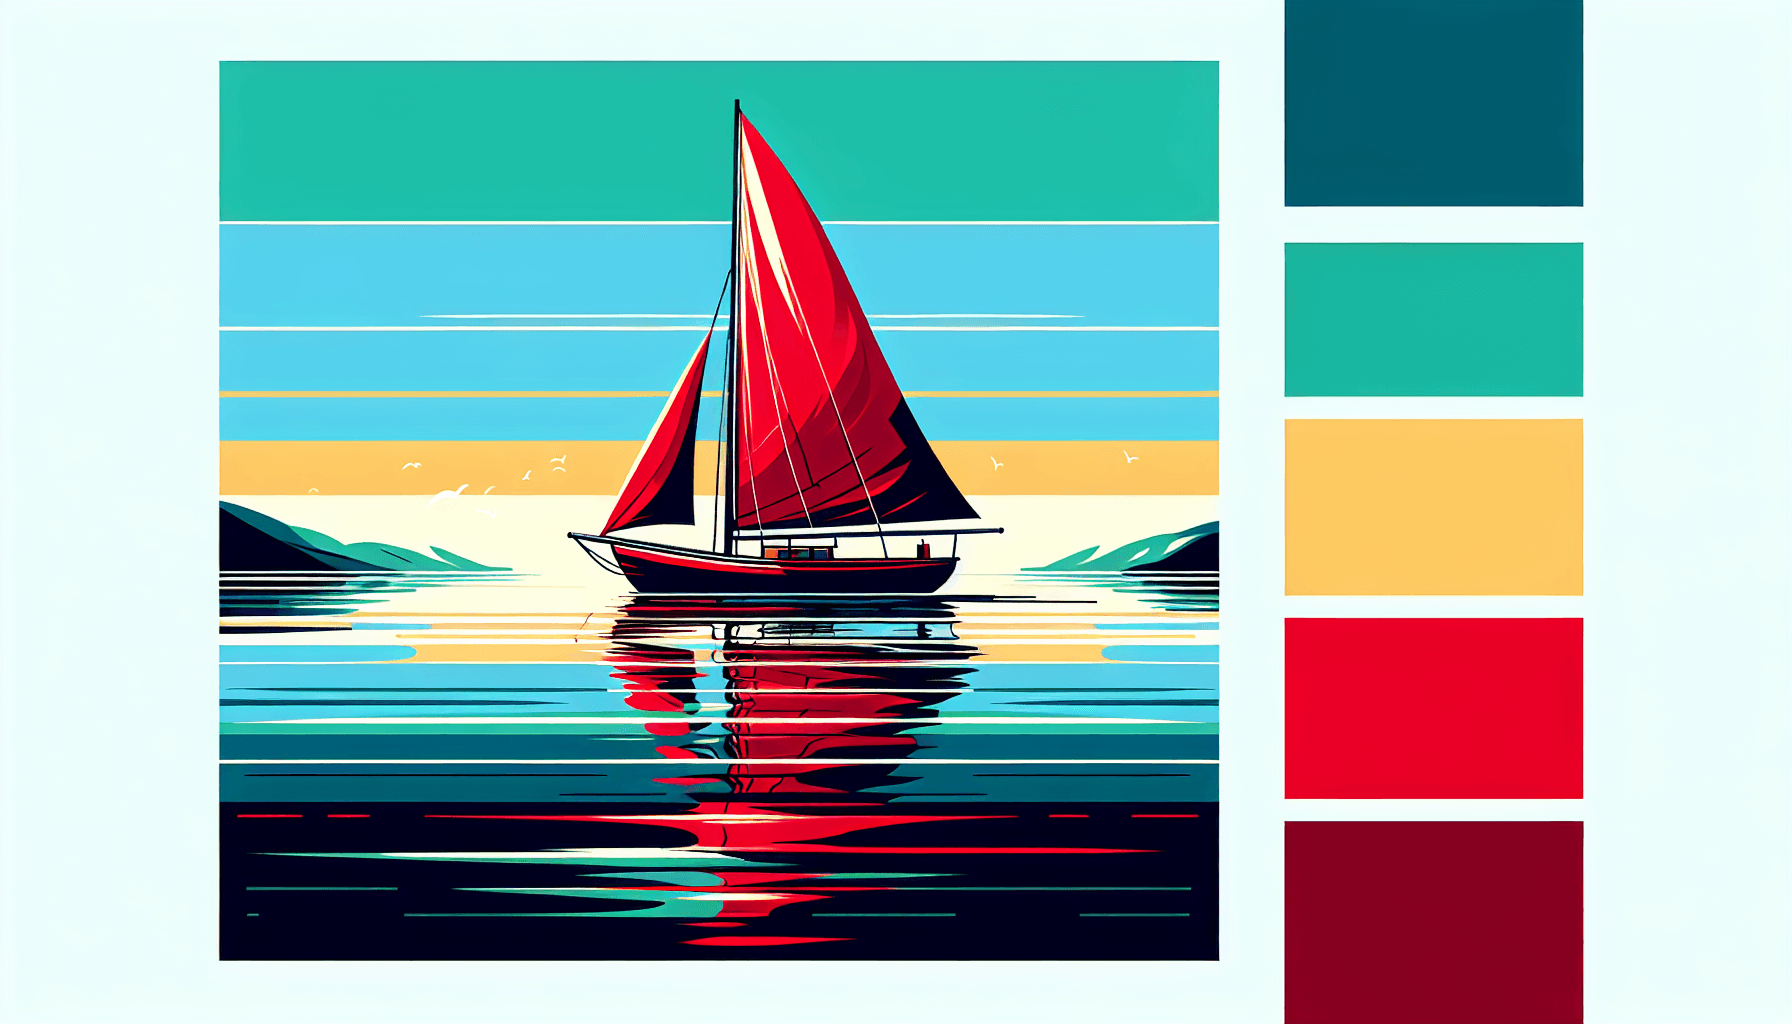 Sailboat in flat illustration style and white background, red #f47574, green #88c7a8, yellow #fcc44b, and blue #645bc8 colors.